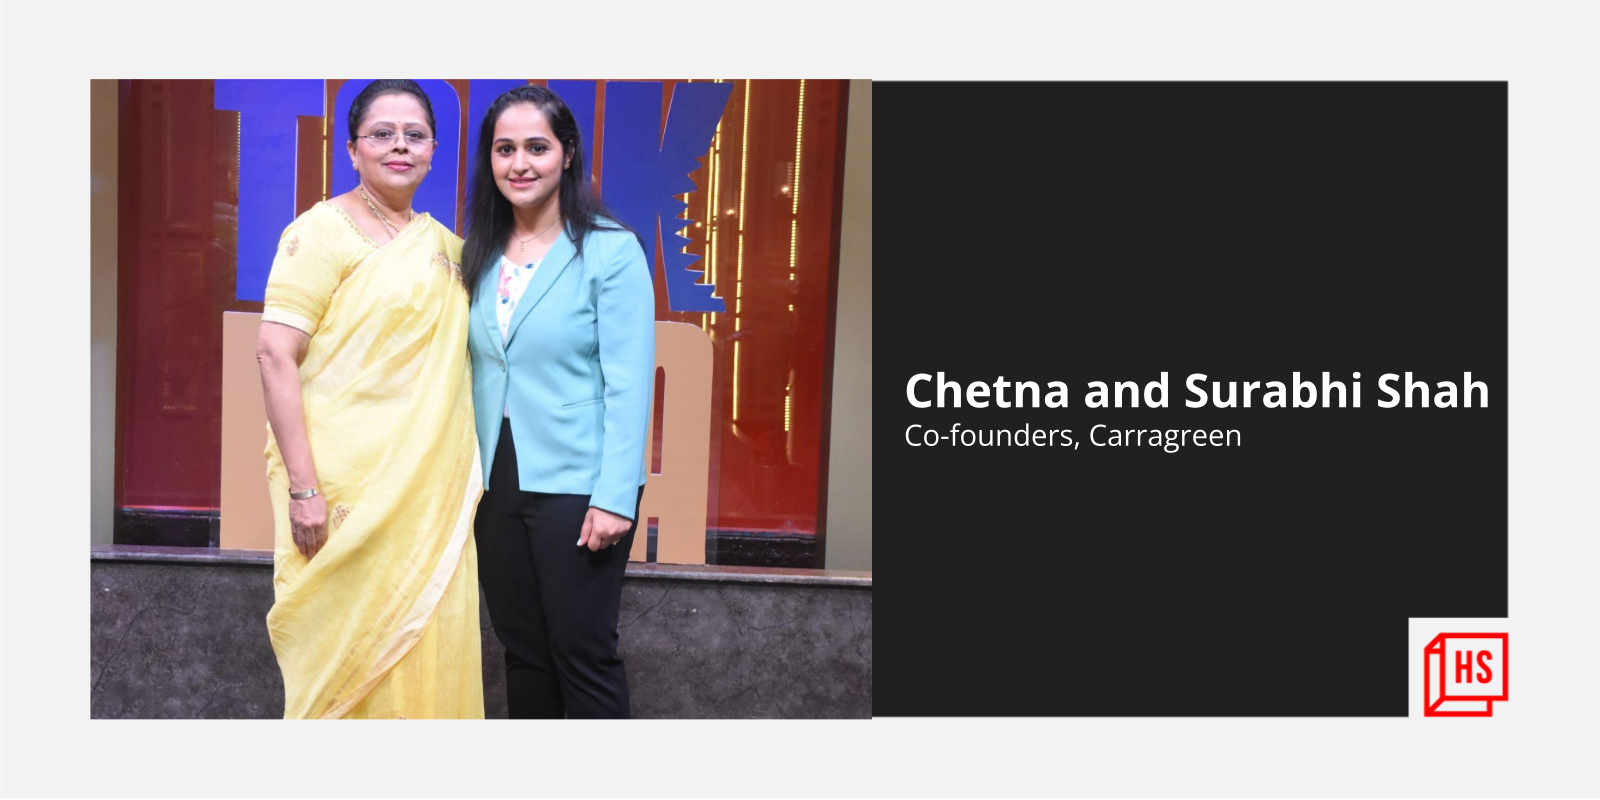 [Women’s Day] This saas-bahu’s eco-friendly startup won Rs 50 lakh funding on Shark Tank India